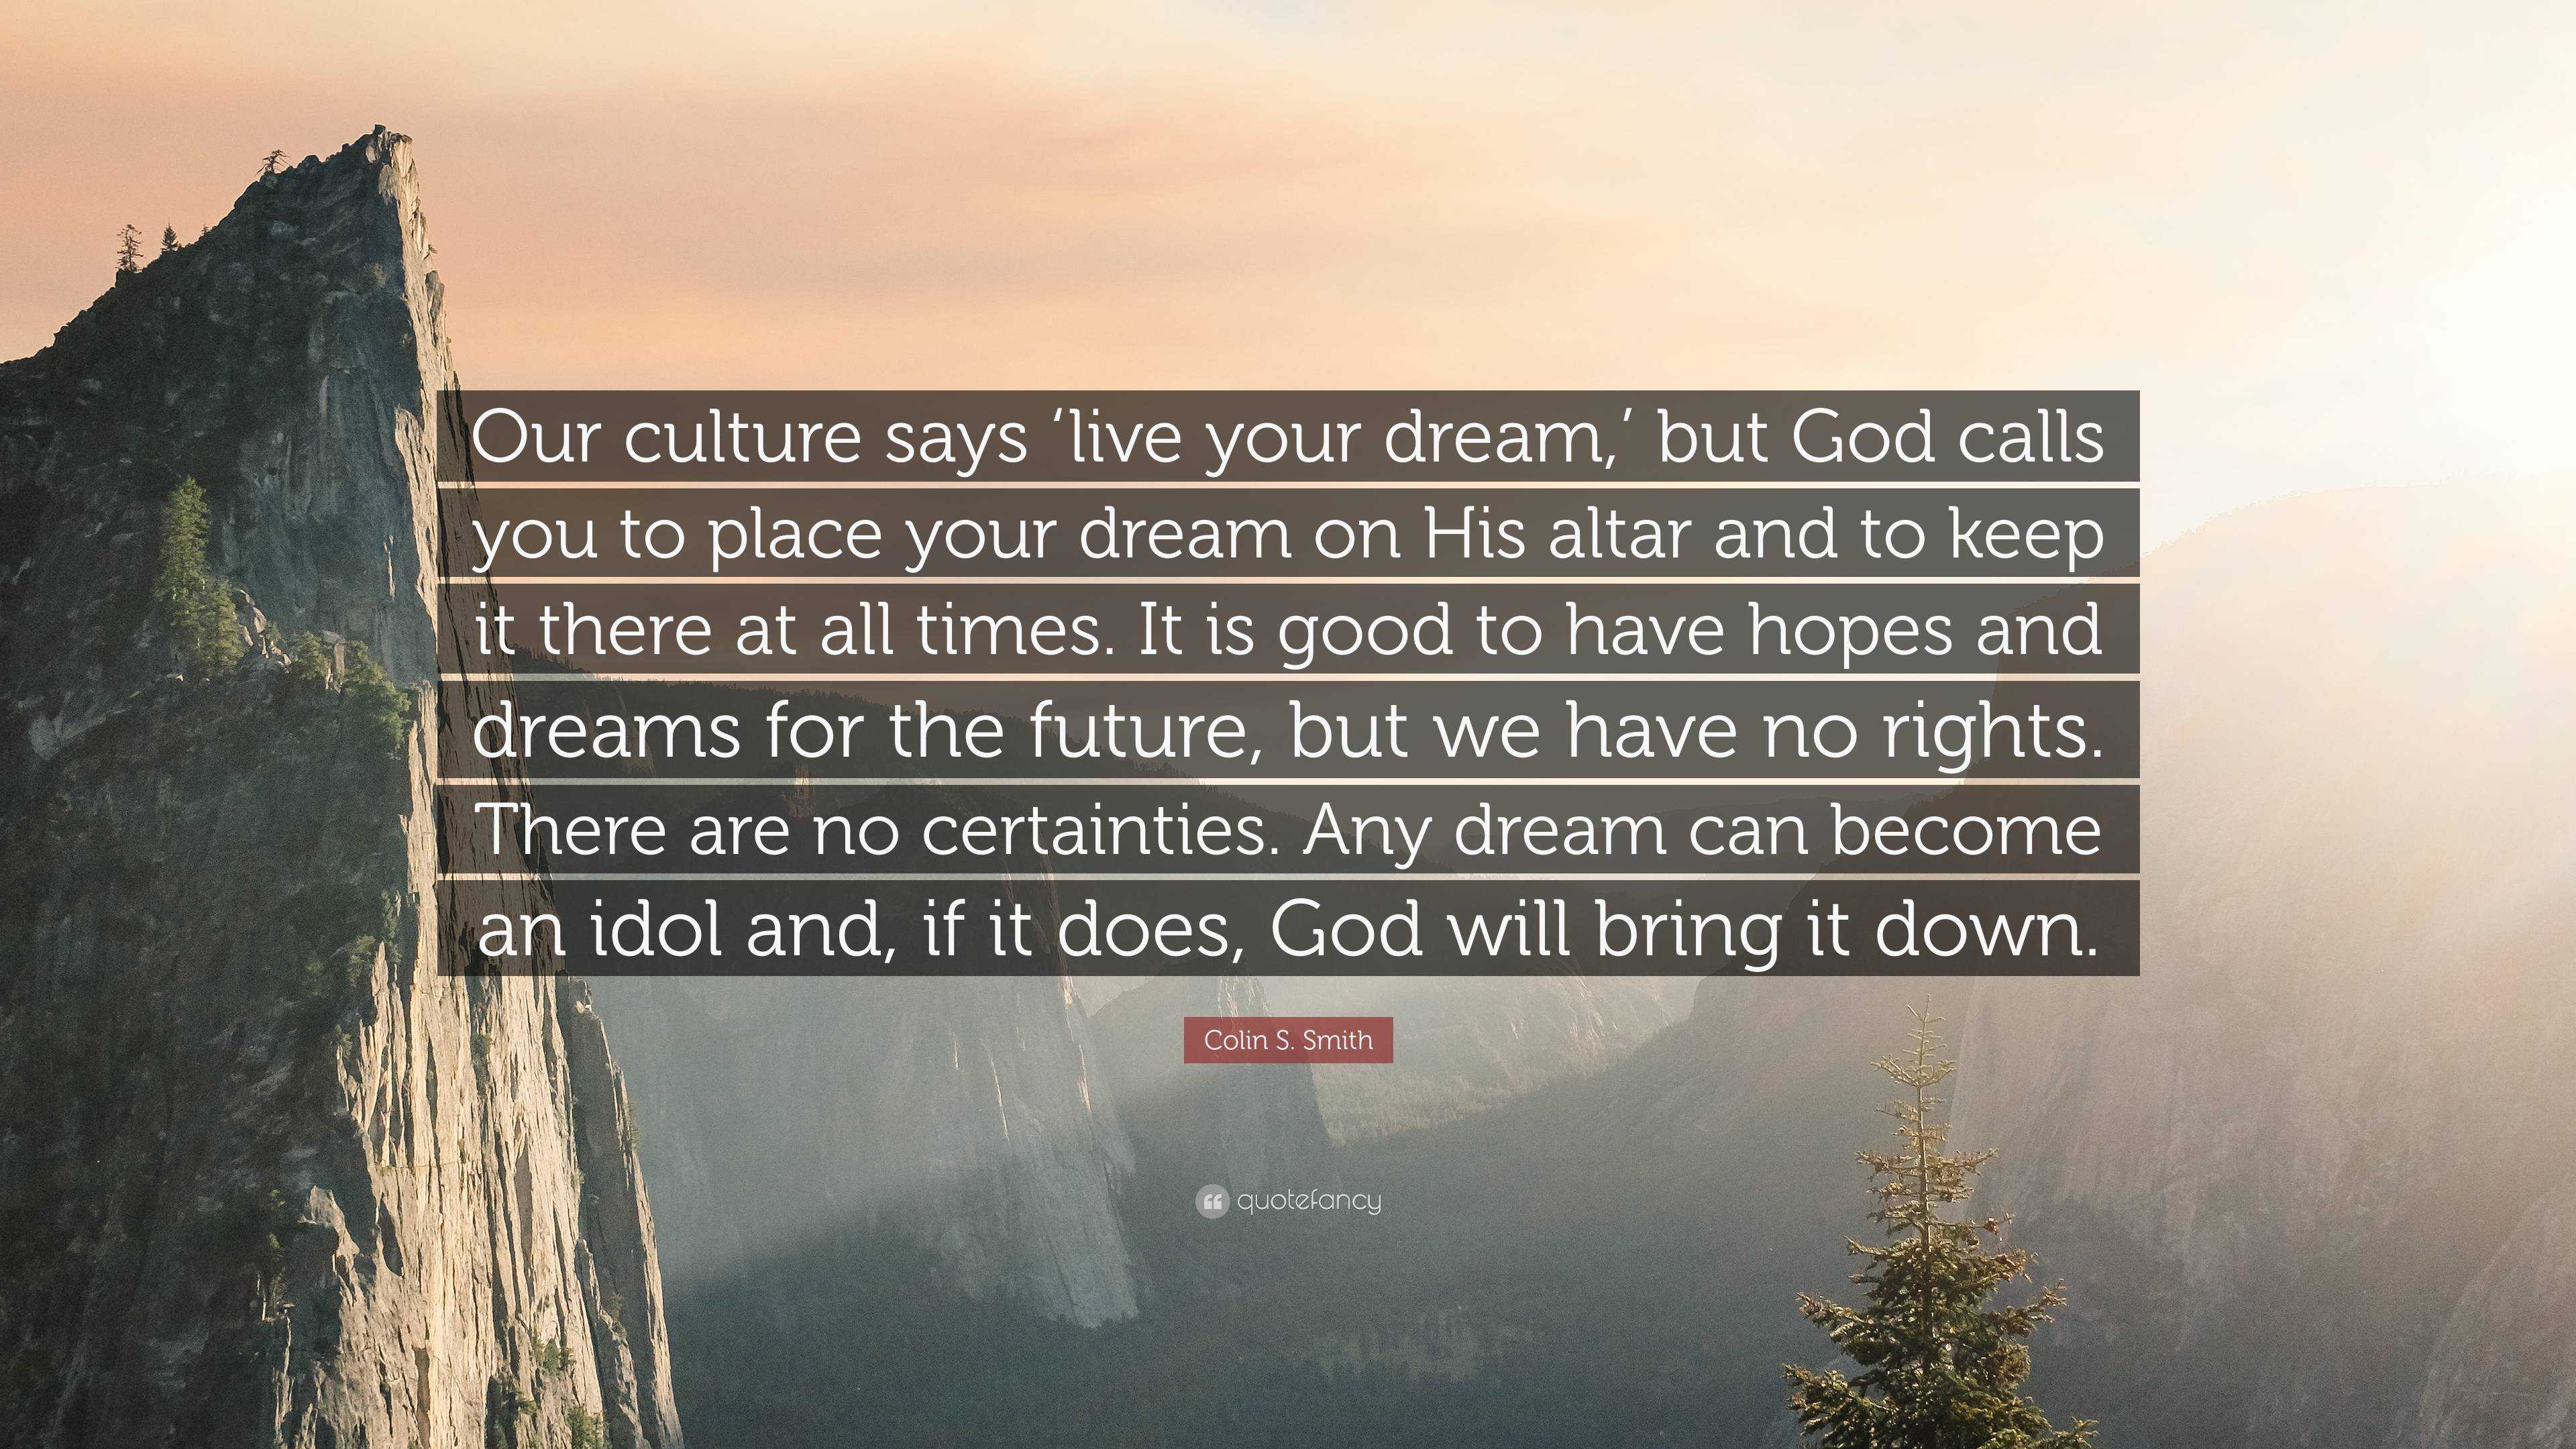 https://quotefancy.com/media/wallpaper/3840x2160/6655440-Colin-S-Smith-Quote-Our-culture-says-live-your-dream-but-God-calls.jpg